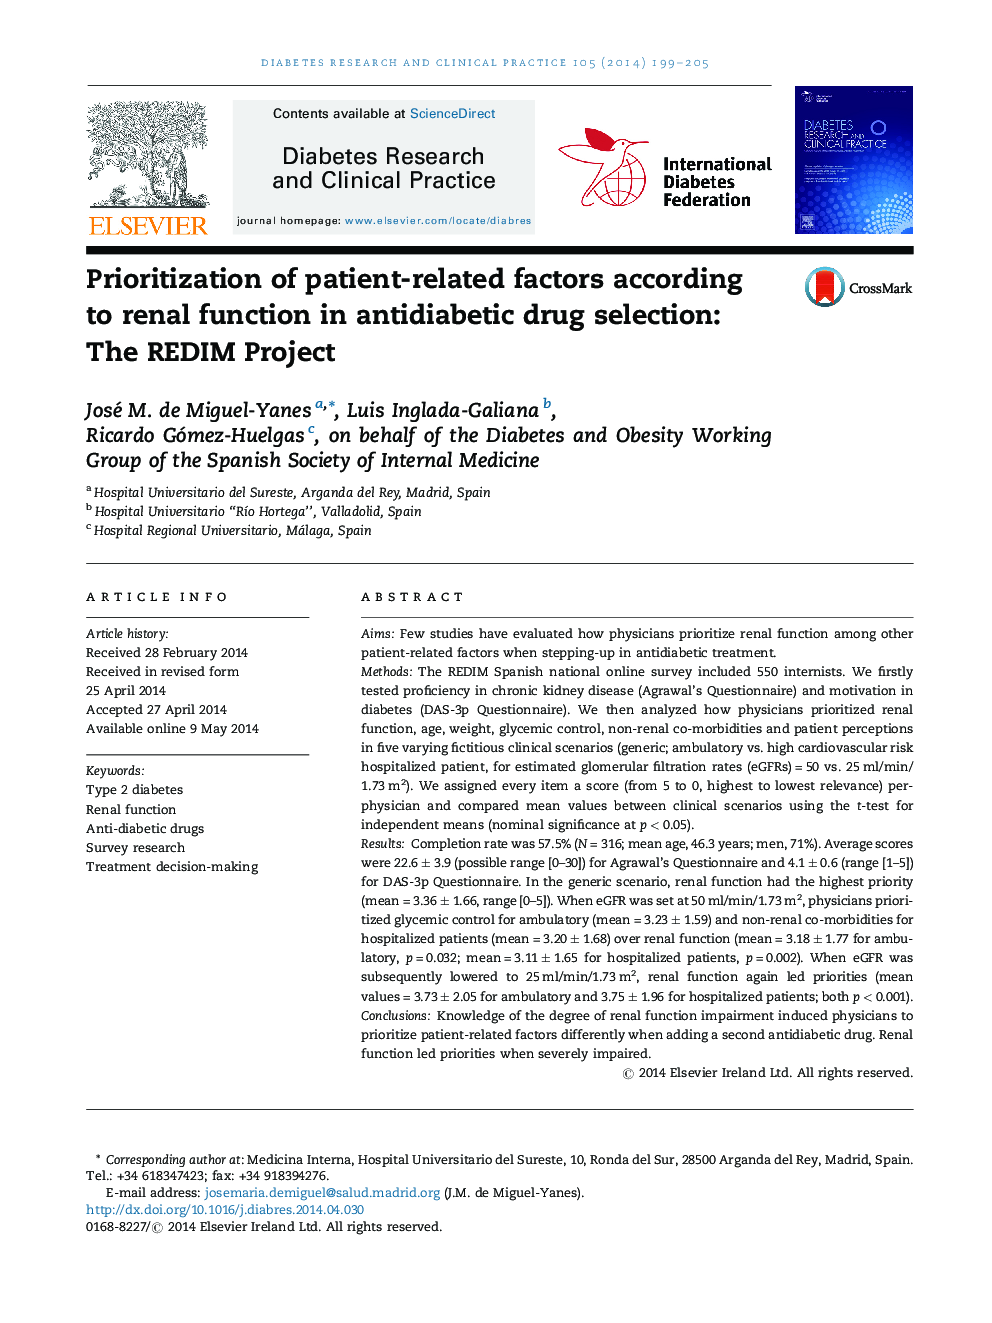 Prioritization of patient-related factors according to renal function in antidiabetic drug selection: The REDIM Project